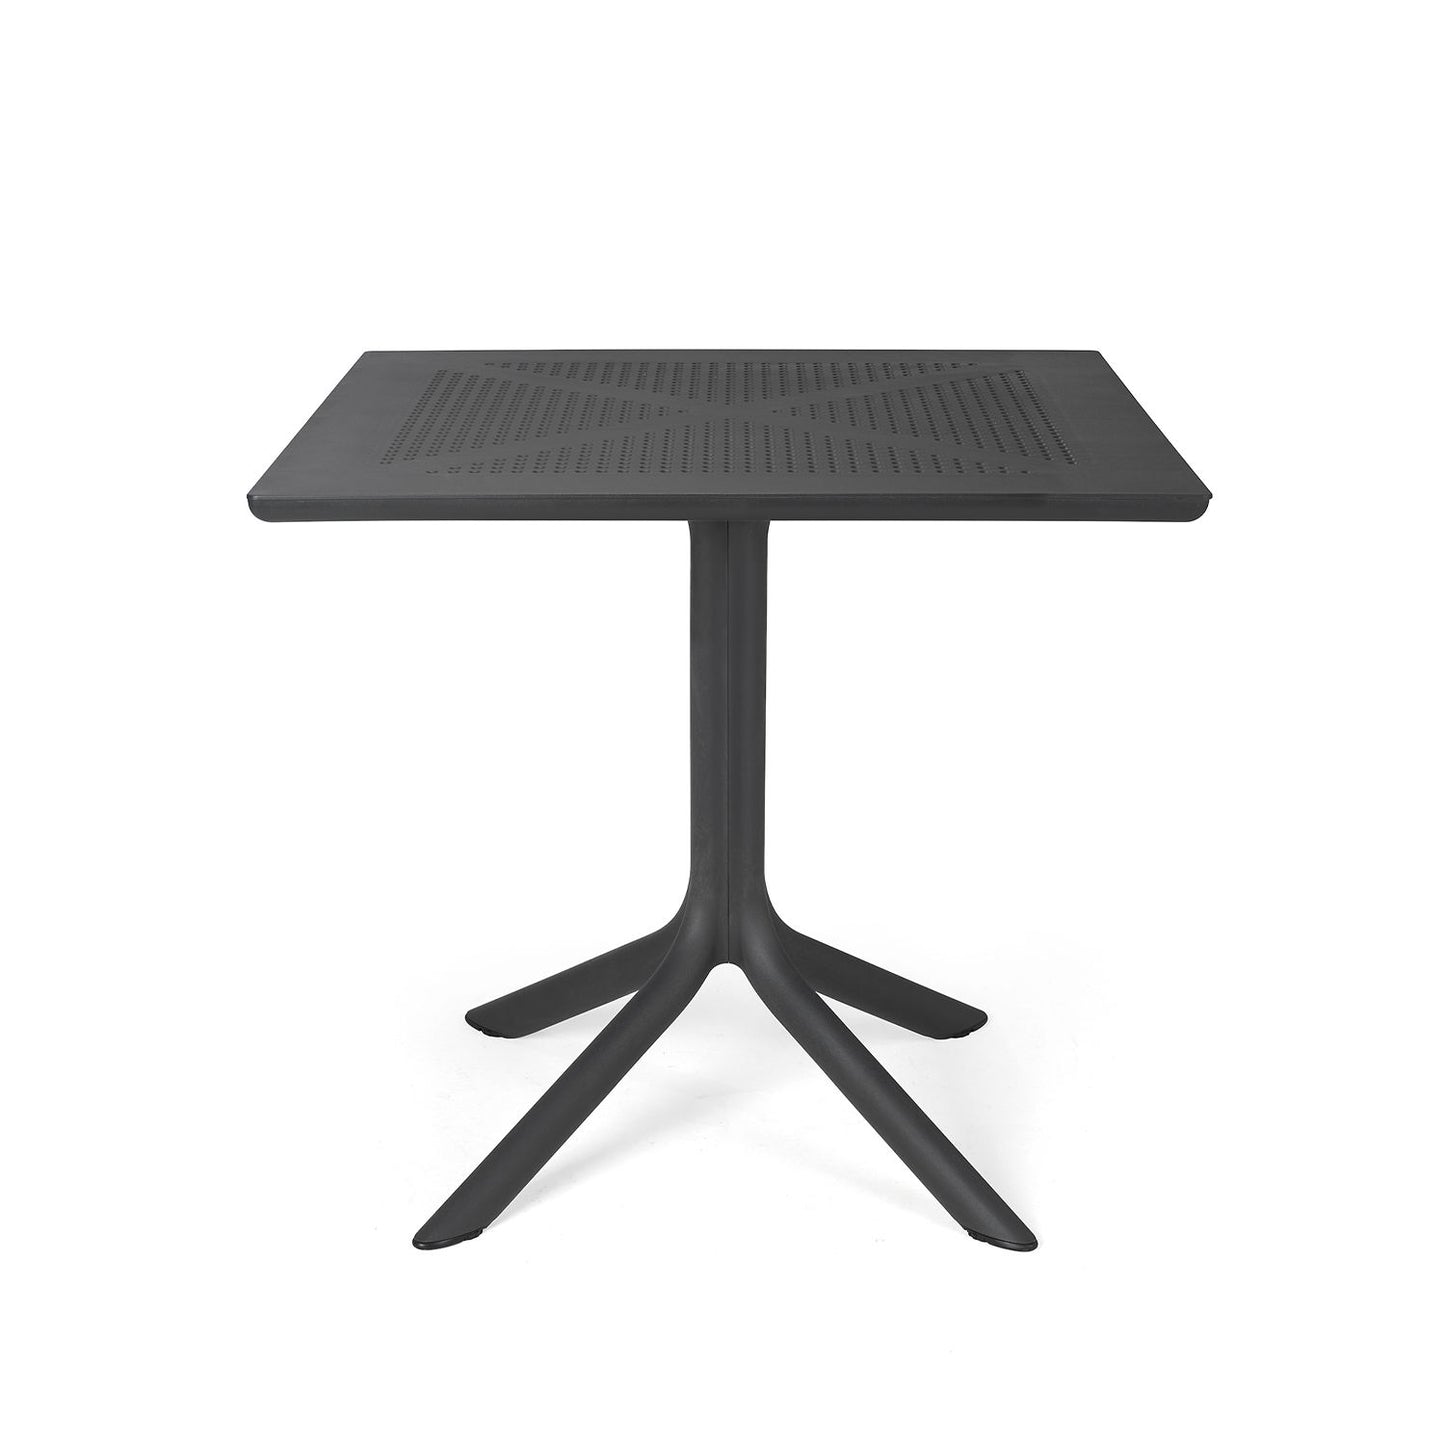 Clip 80cm Garden Table By Nardi - Anthracite